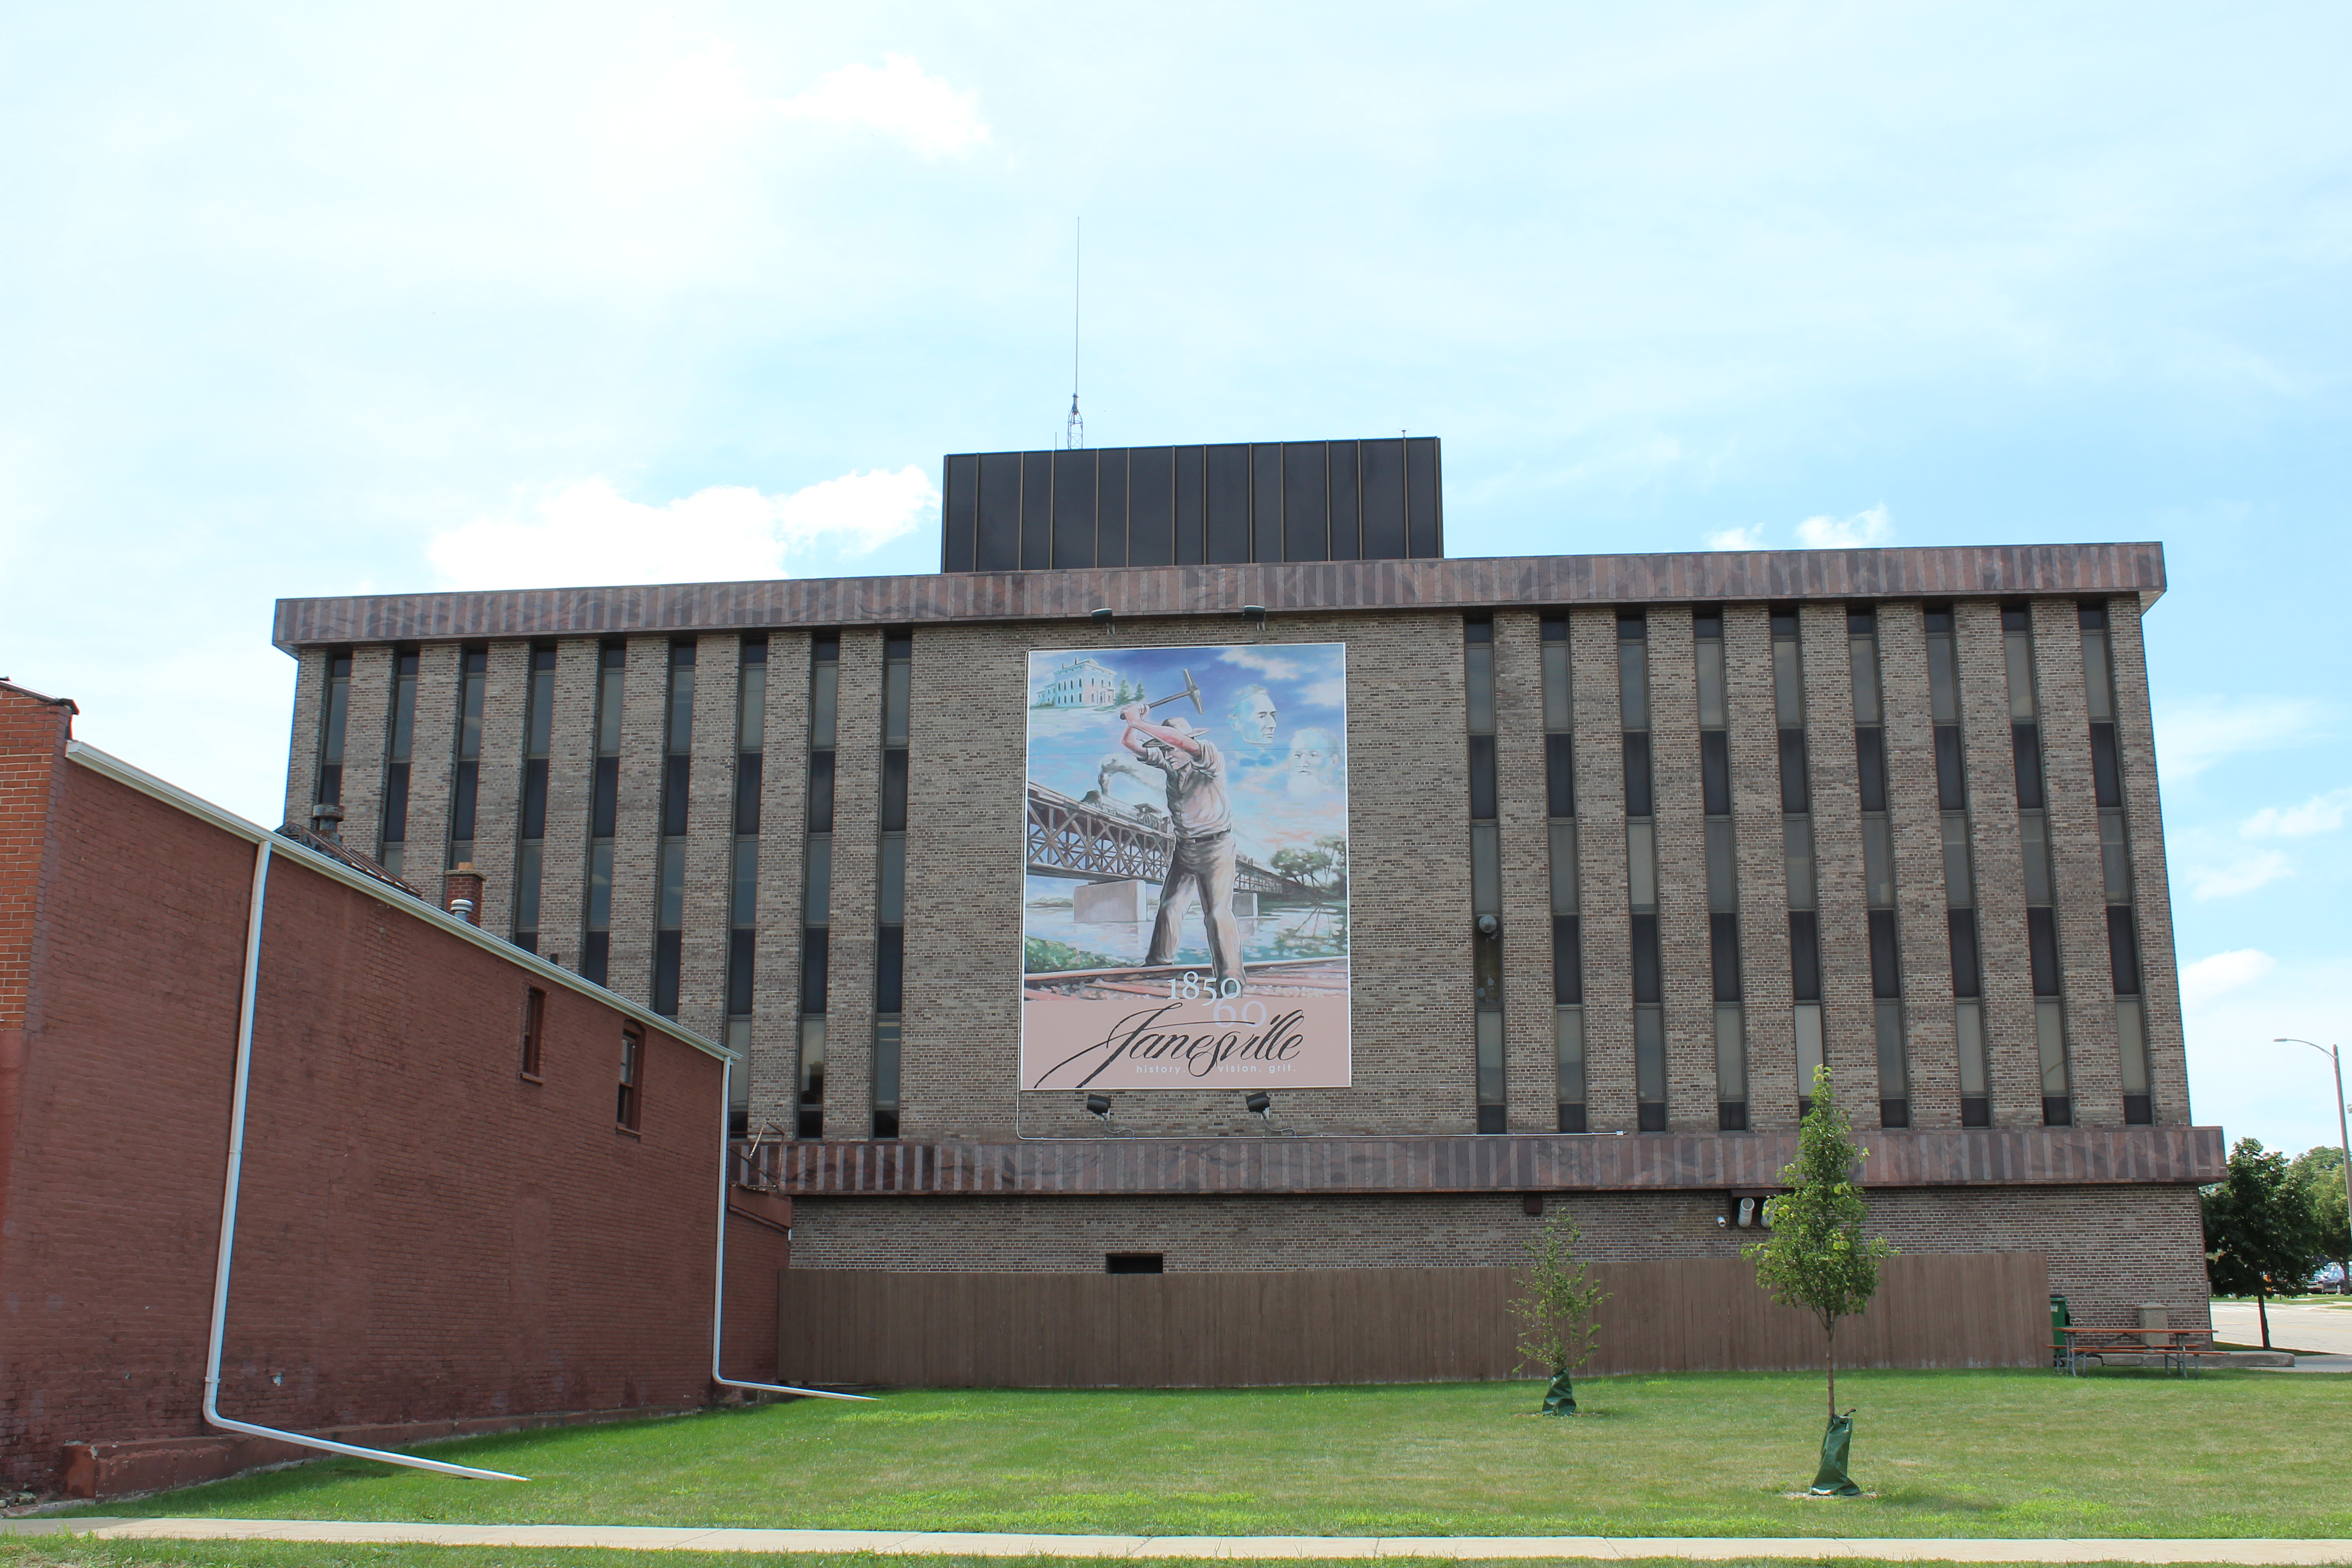 The mural, as seen from the street.